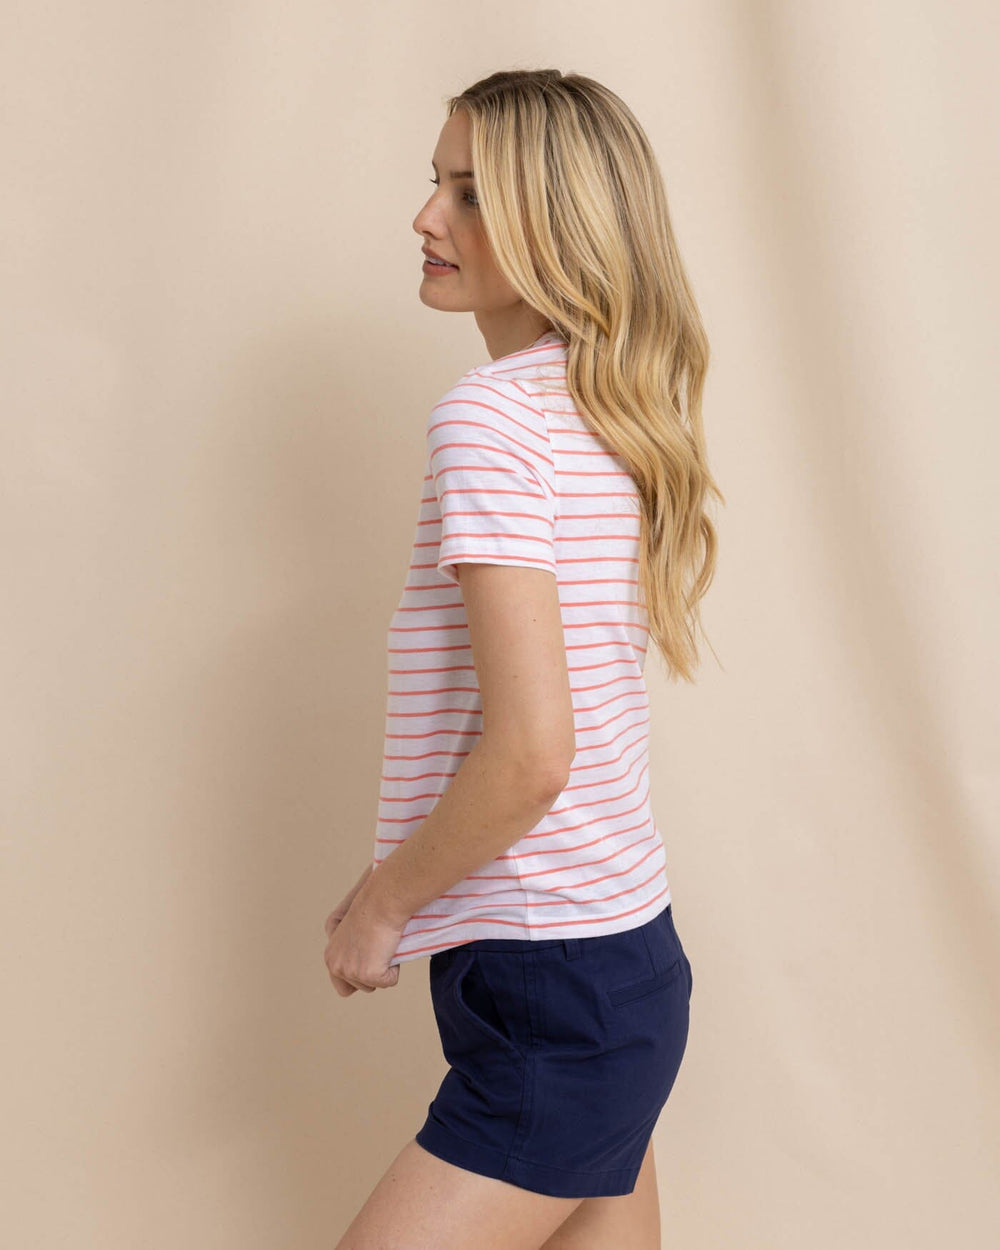 The front view of the Southern Tide Sun Farer Stripe Crew Neck T-Shirt by Southern Tide - Conch Shell